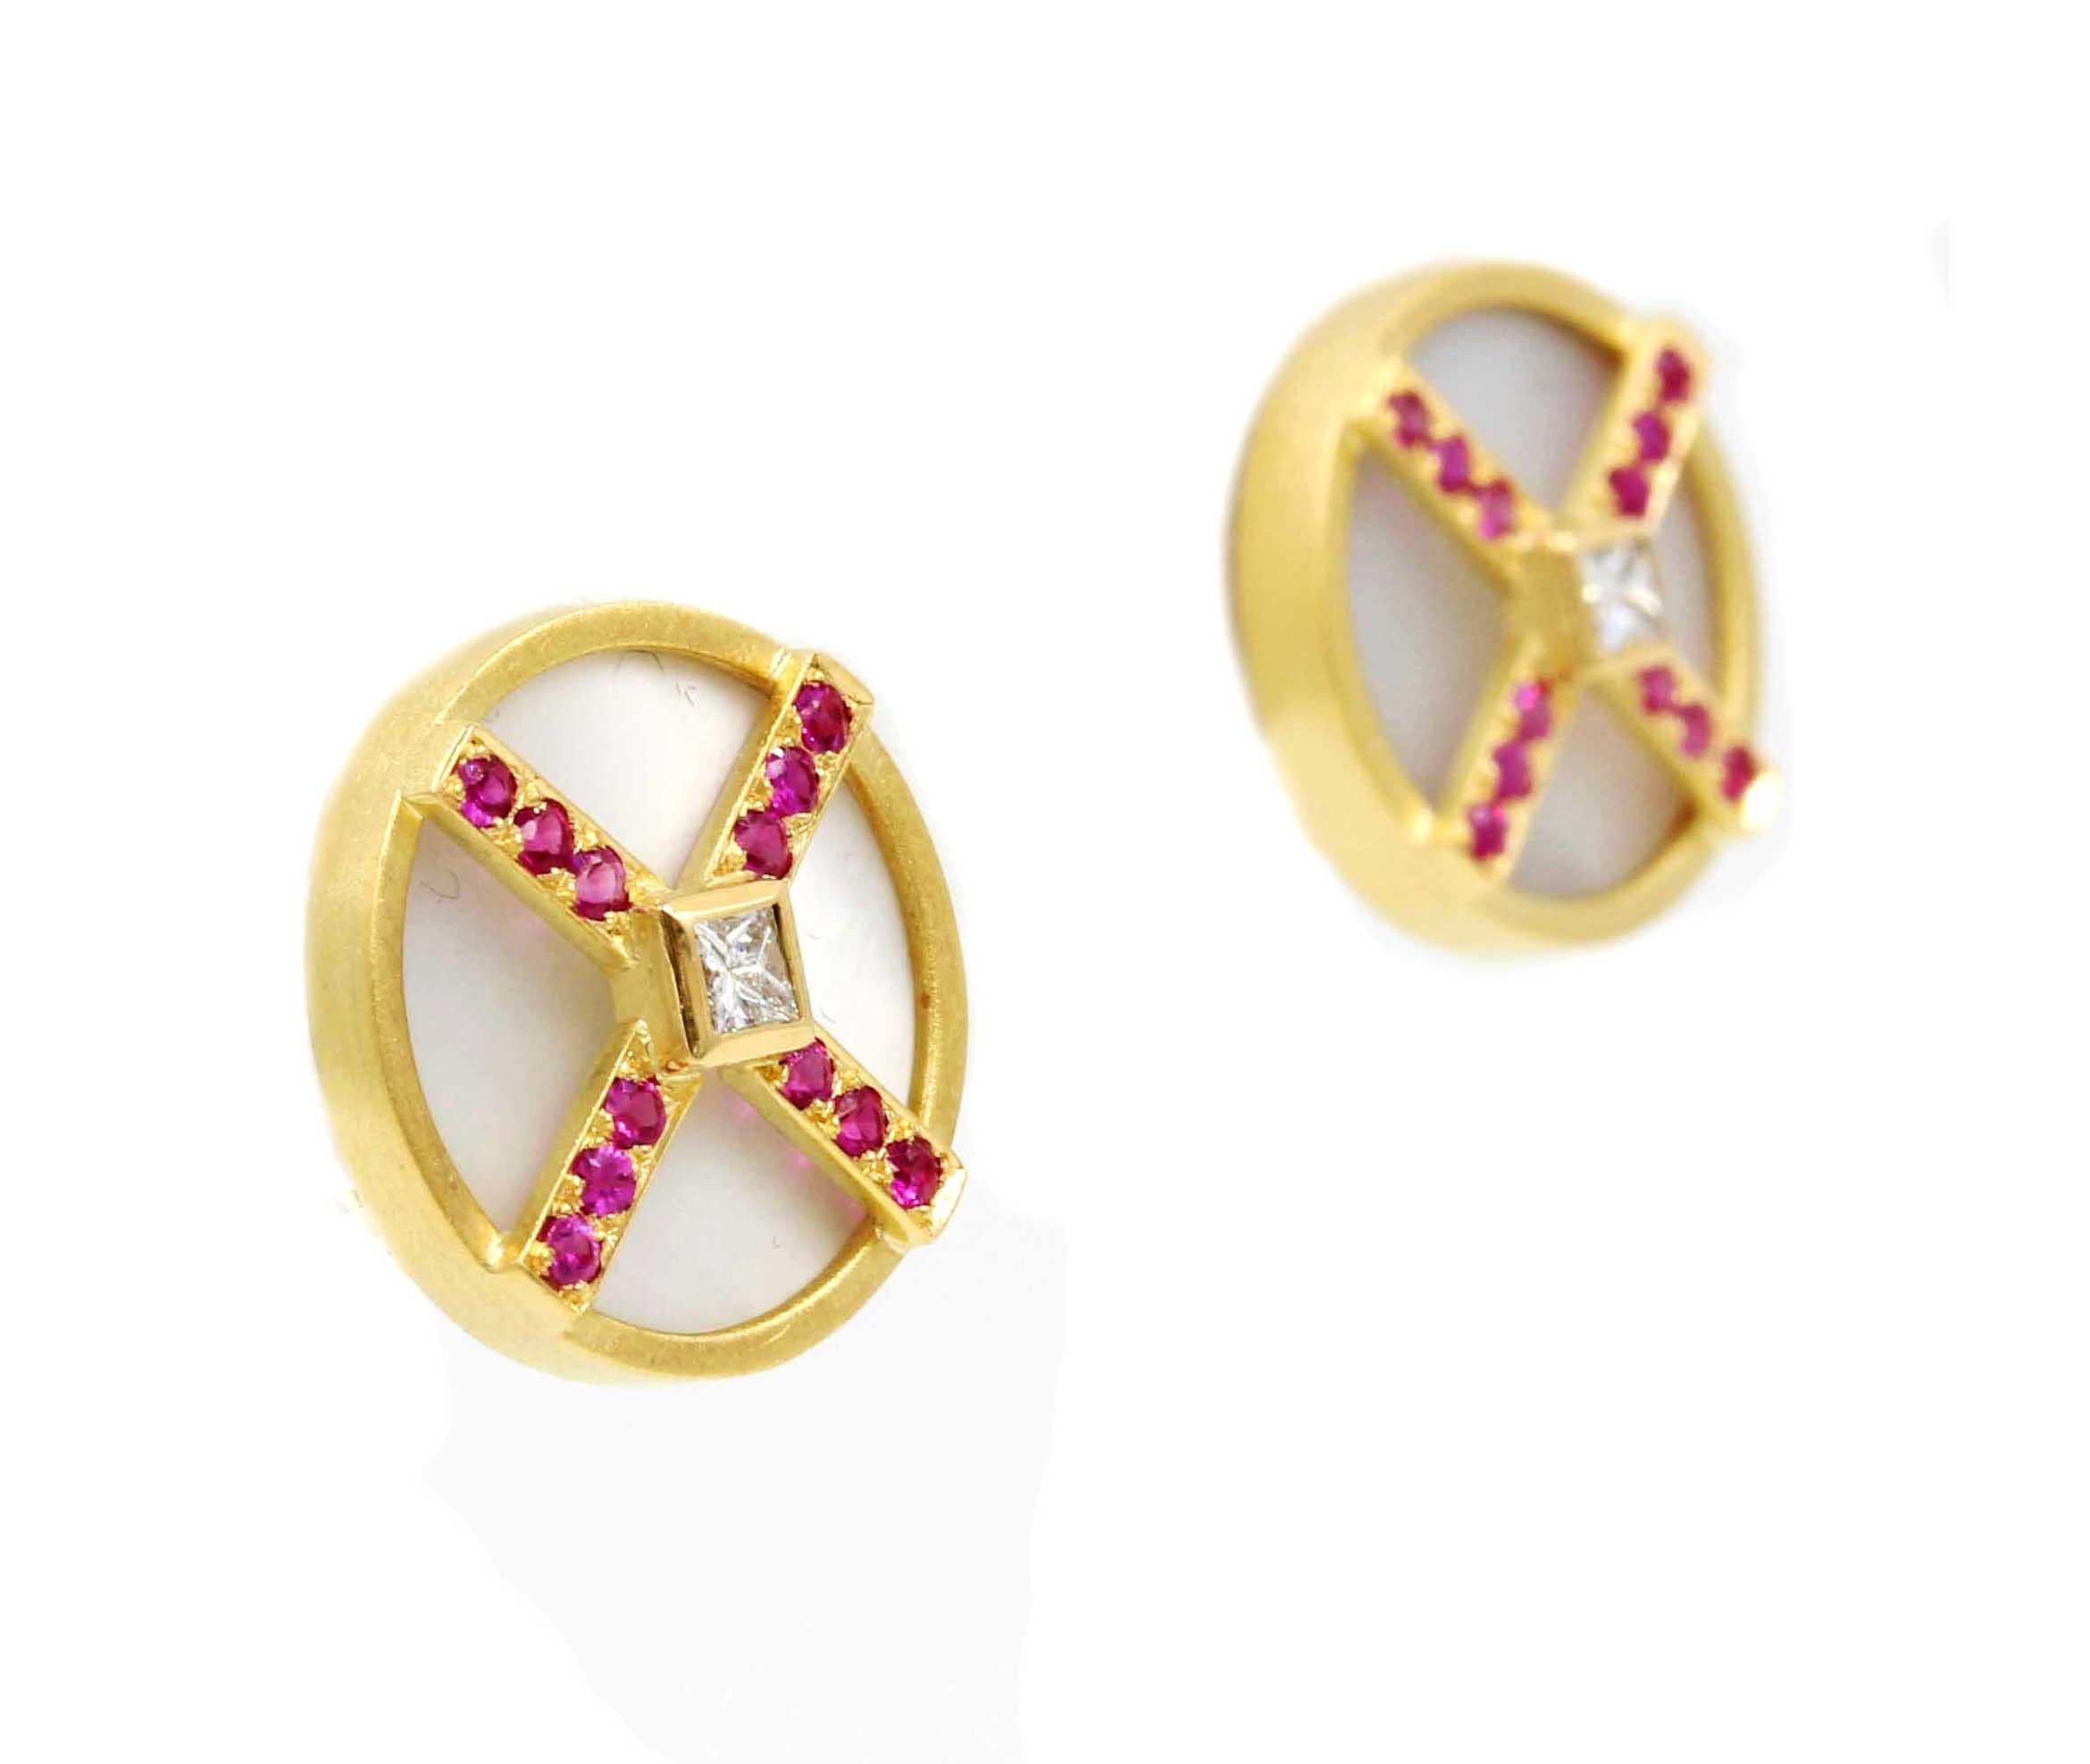 Contemporary Janis Kerman, 18 Karat Gold, Diamond, Pink Sapphire, Mother of Pearl Earrings For Sale